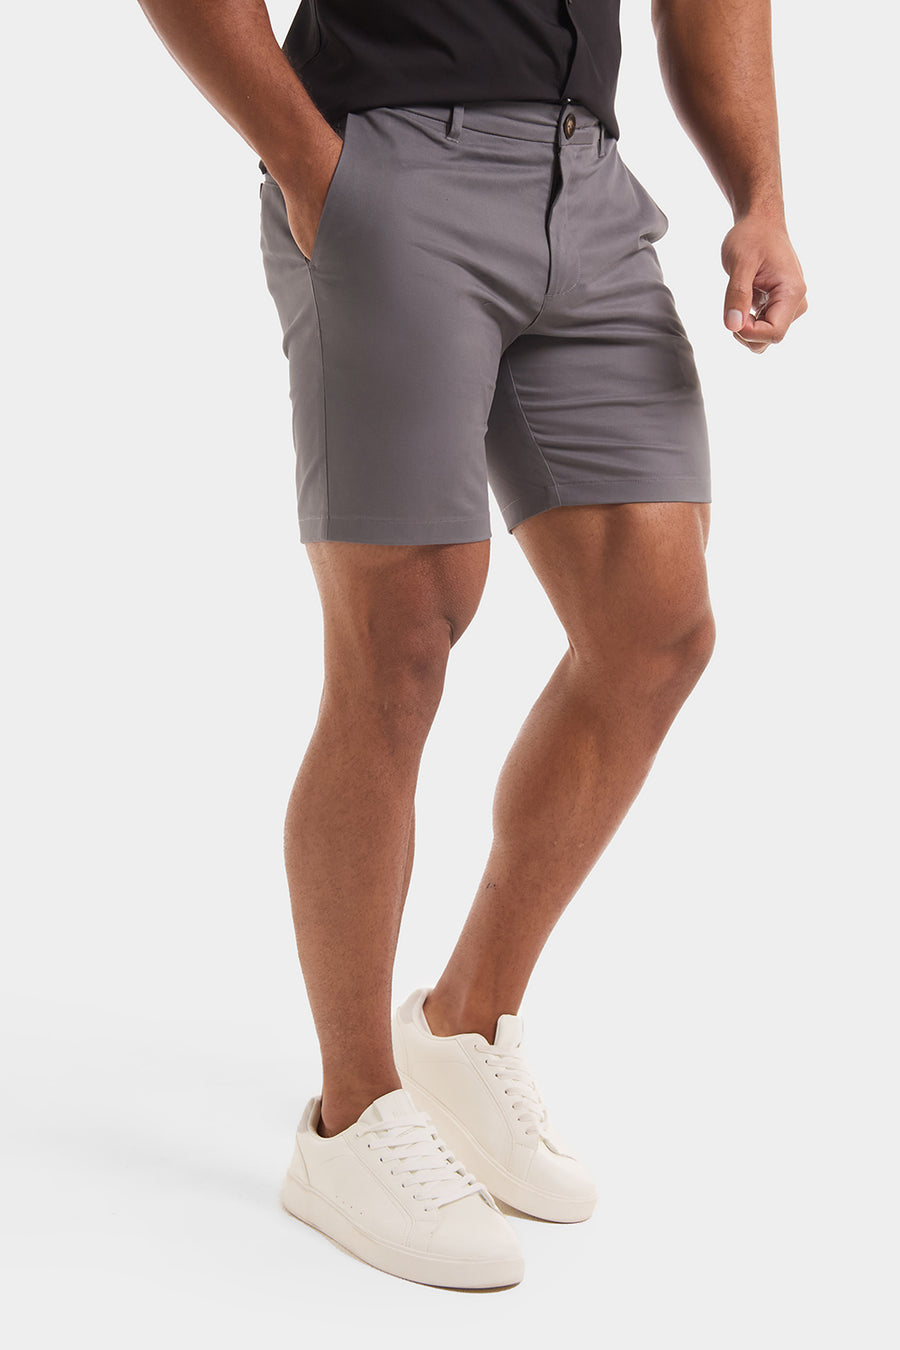 Athletic Fit Shorts - TAILORED ATHLETE - USA